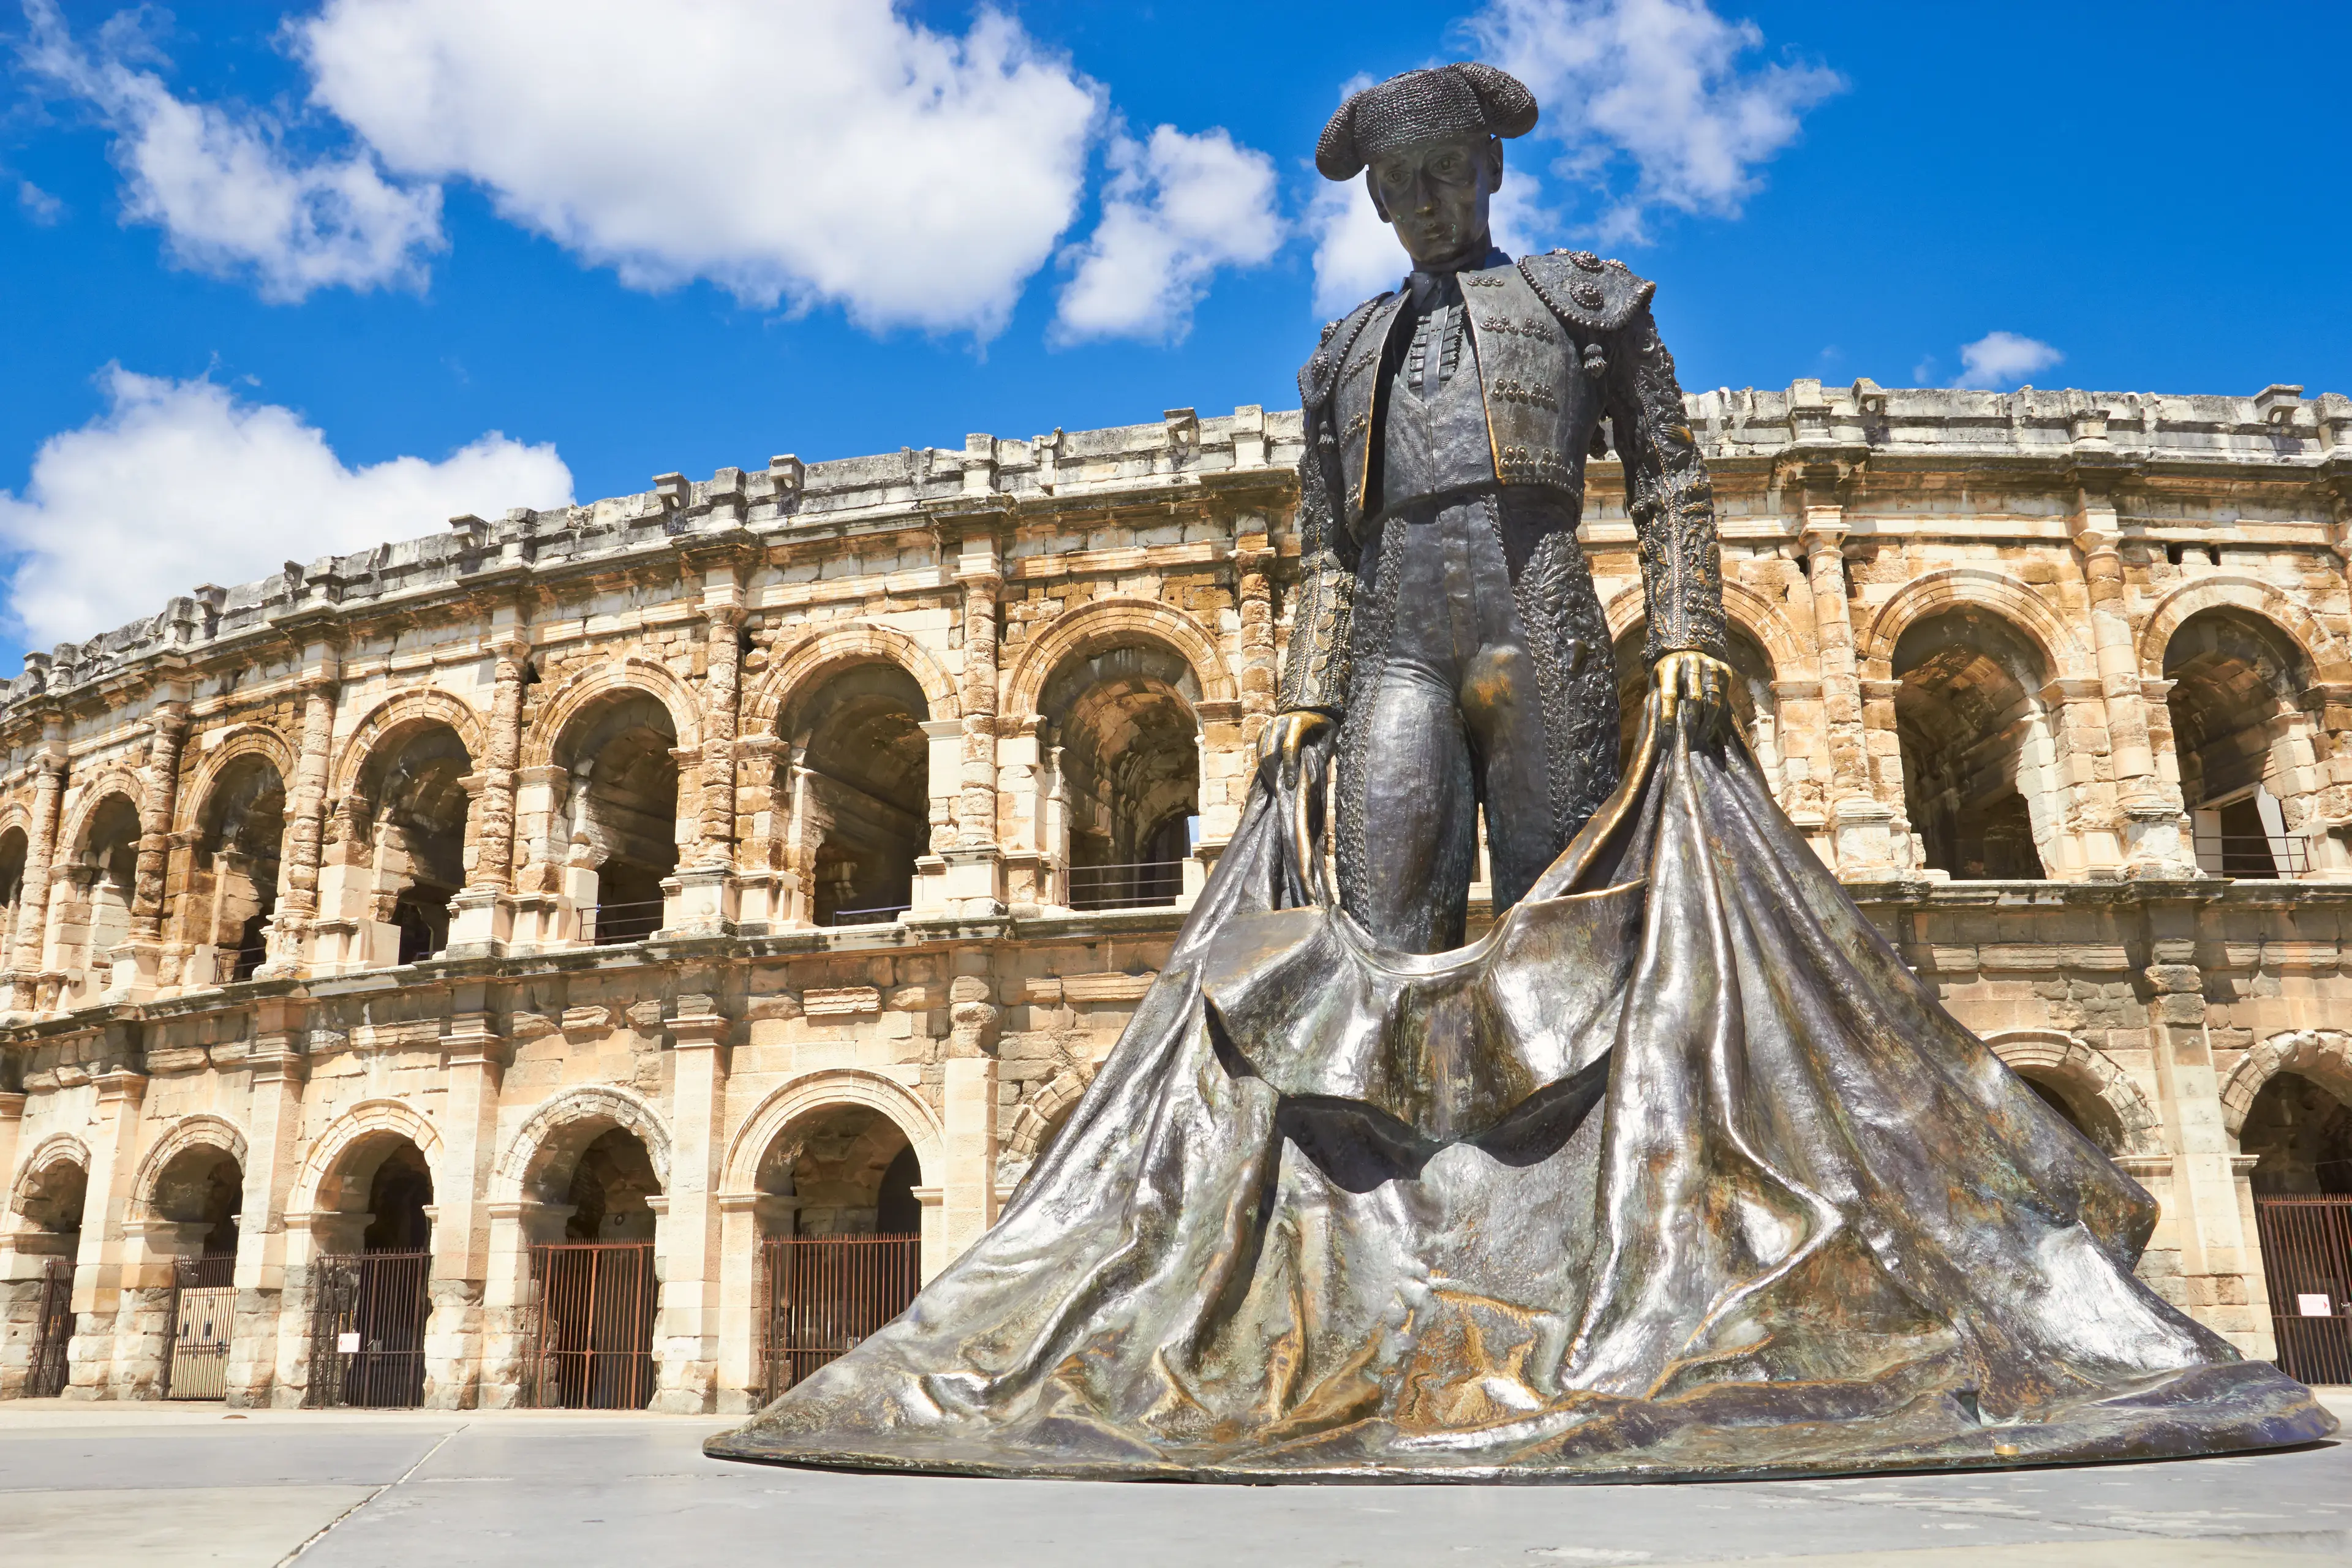 2-Day Solo Local Experience: Nimes Sightseeing and Culinary Journey